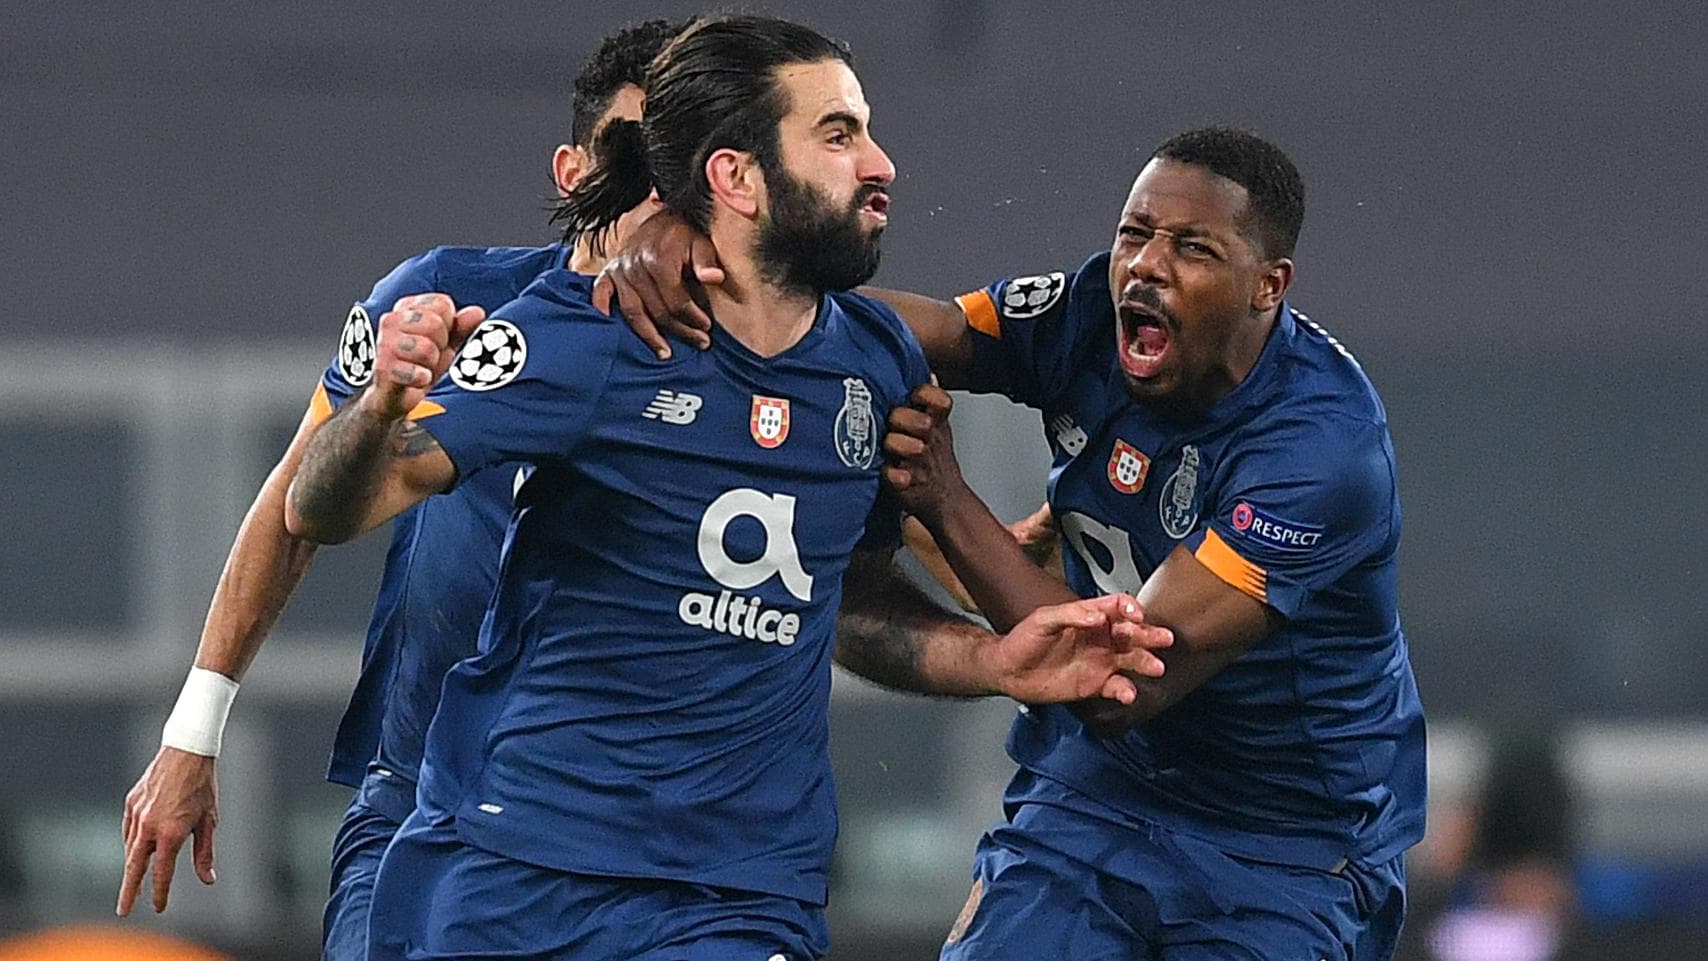 Porto enters the quarterfinals after beating Juventus